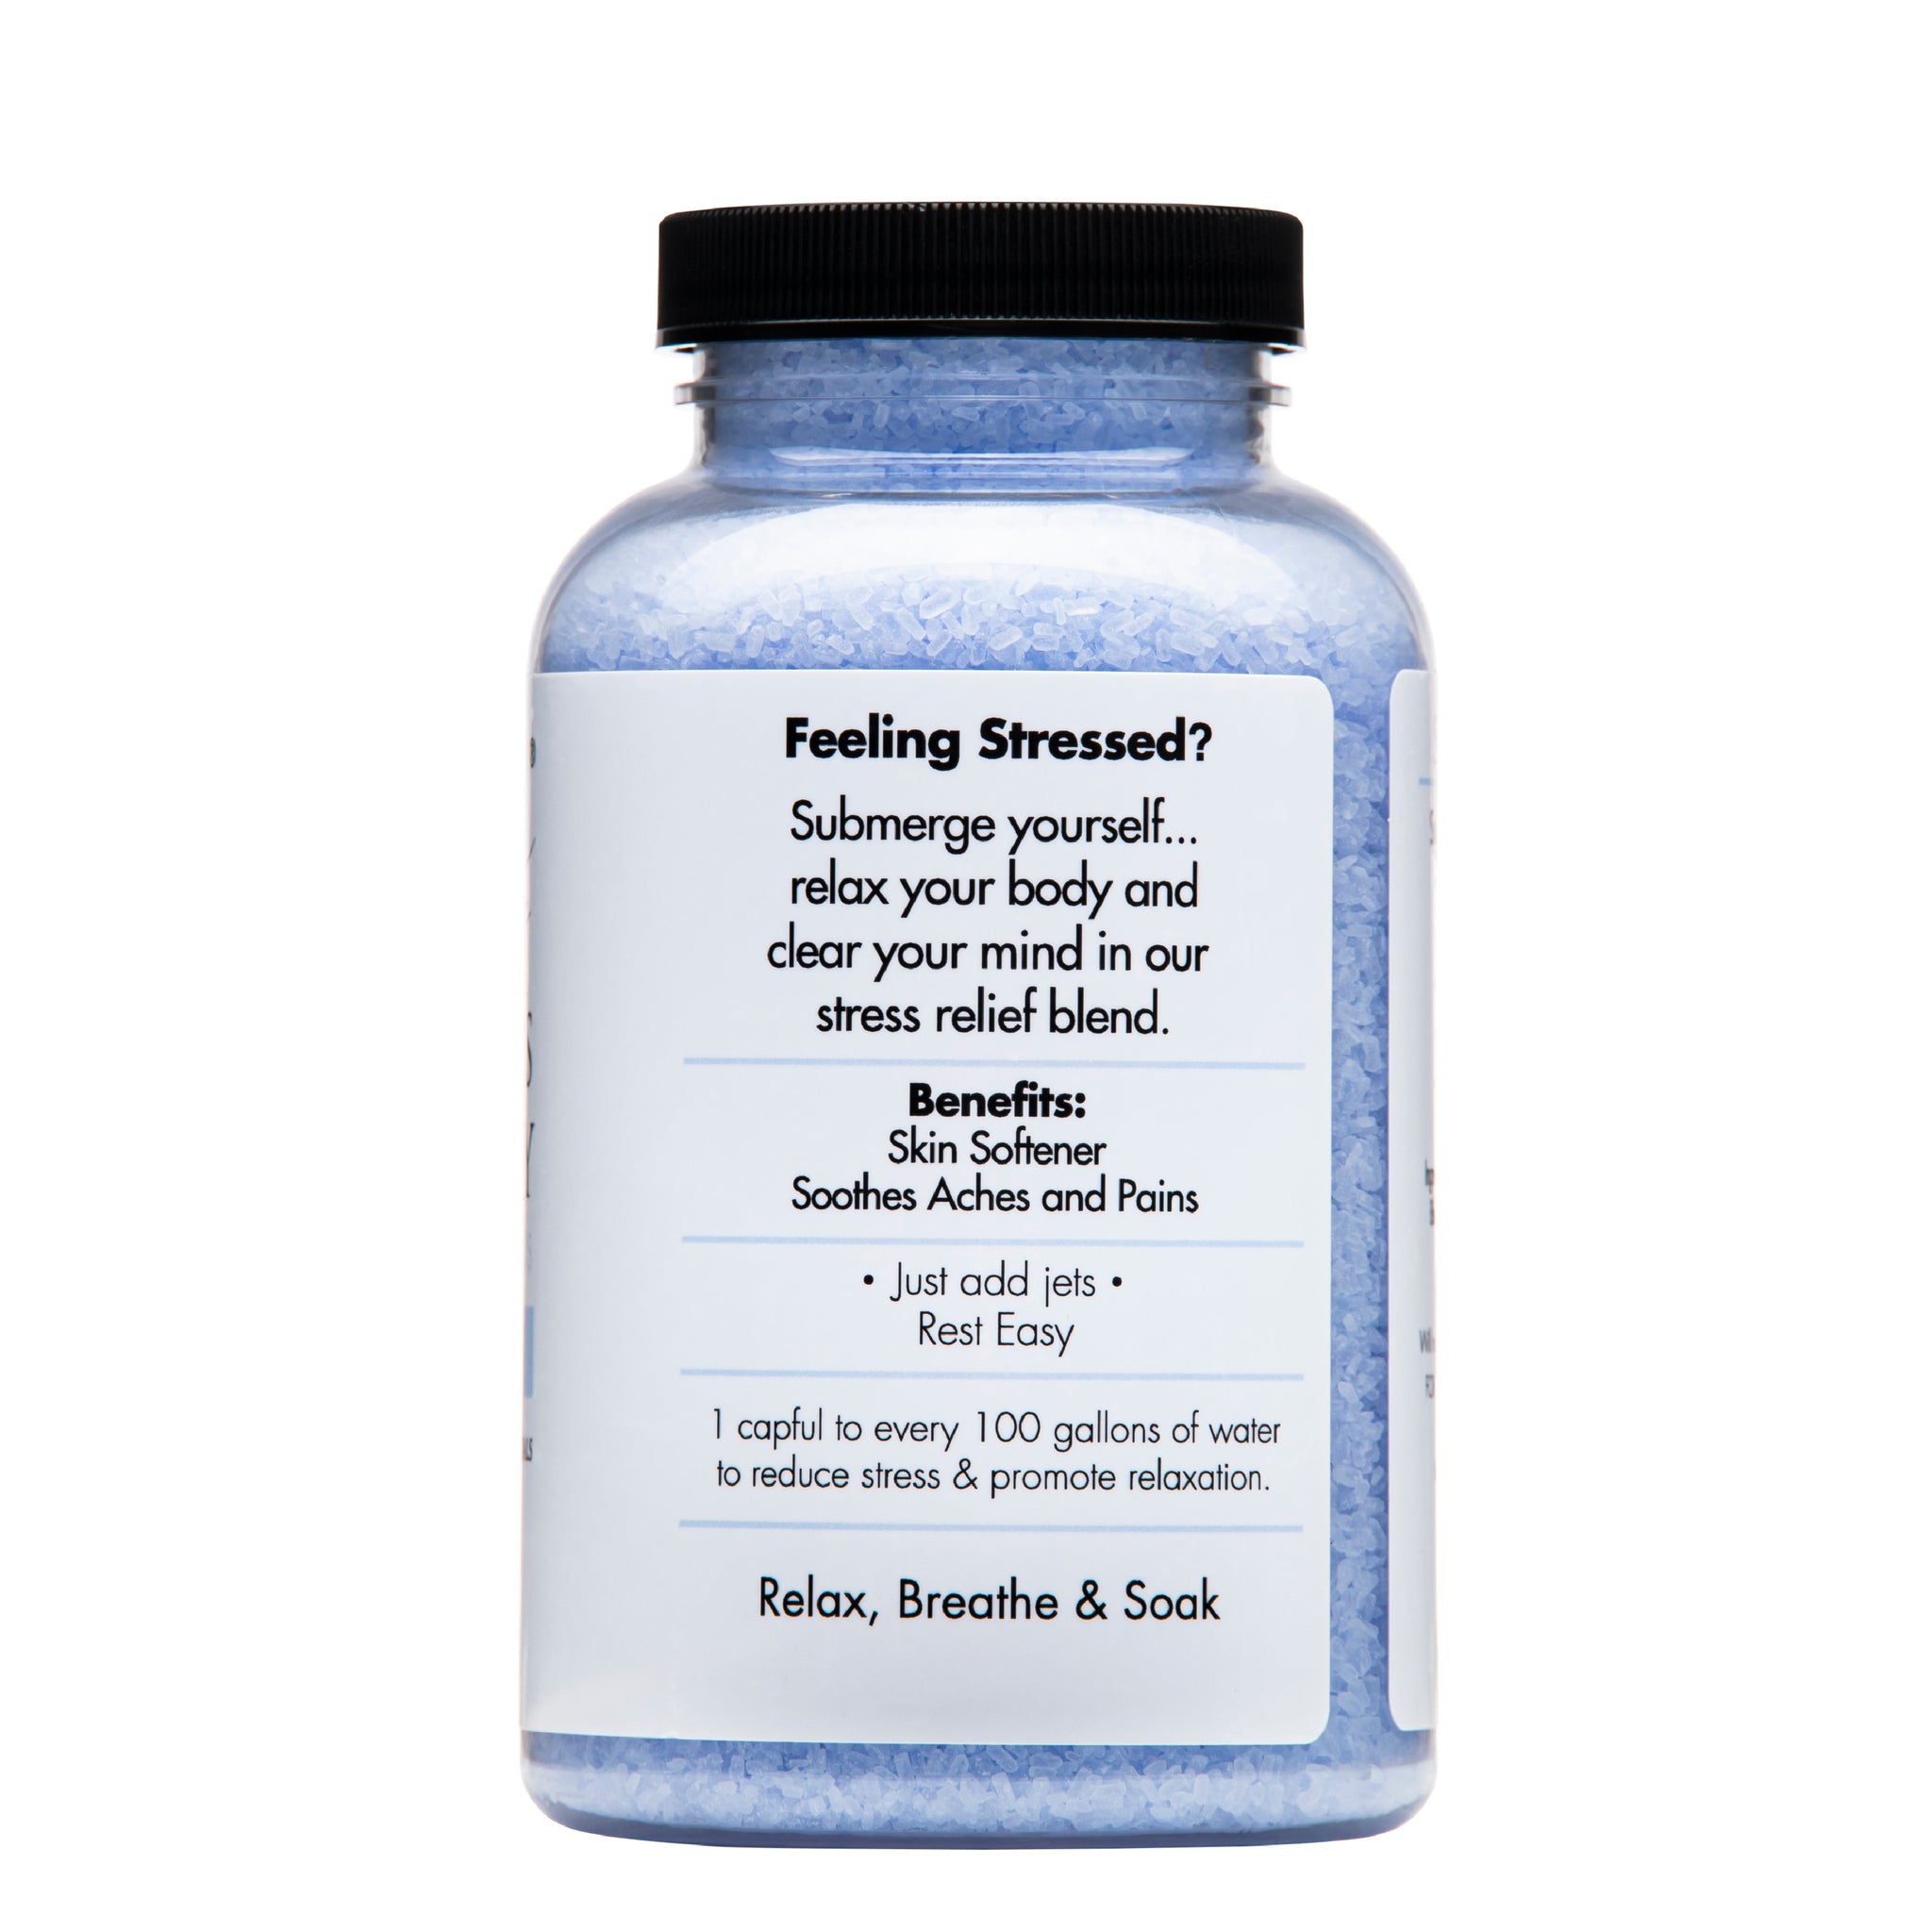 Spazazz RX Therapy Stress Therapy (De-Stress) Crystals 19oz Container